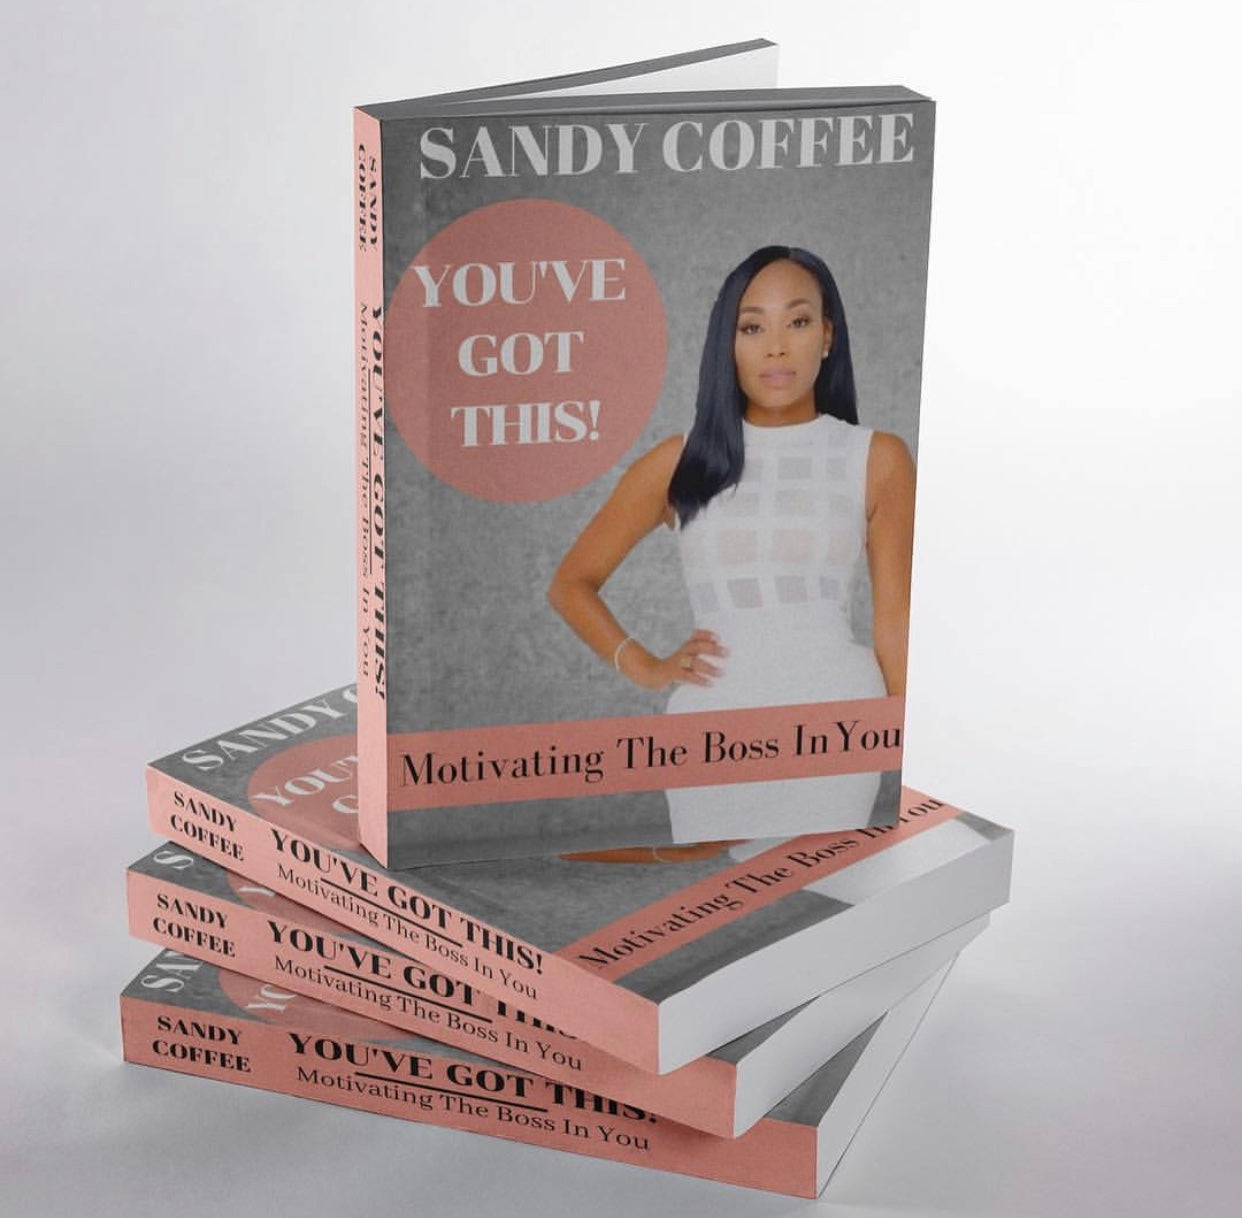 "YOU'VE GOT THIS!" by Sandy Coffee (Paperback)